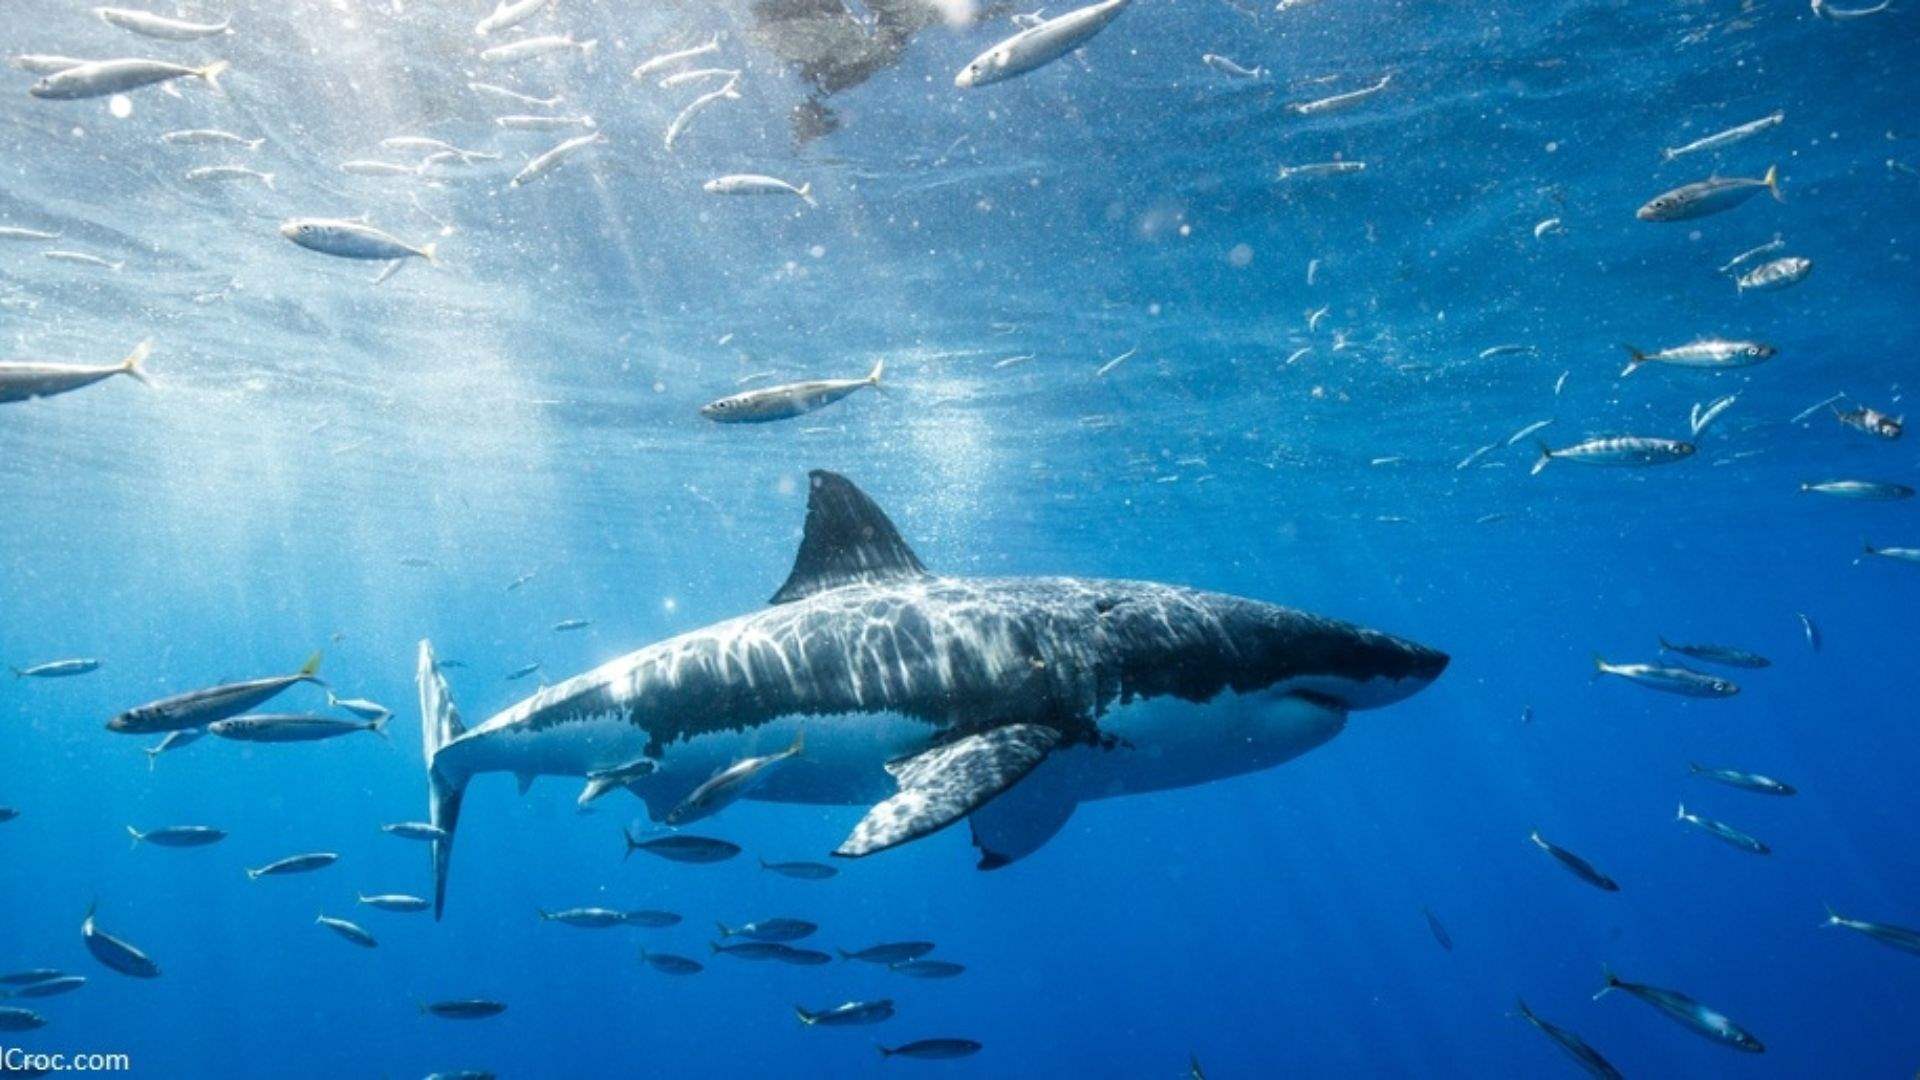 Lebanon’s Agriculture Ministry urges not to panic from sharks, calls for its protection